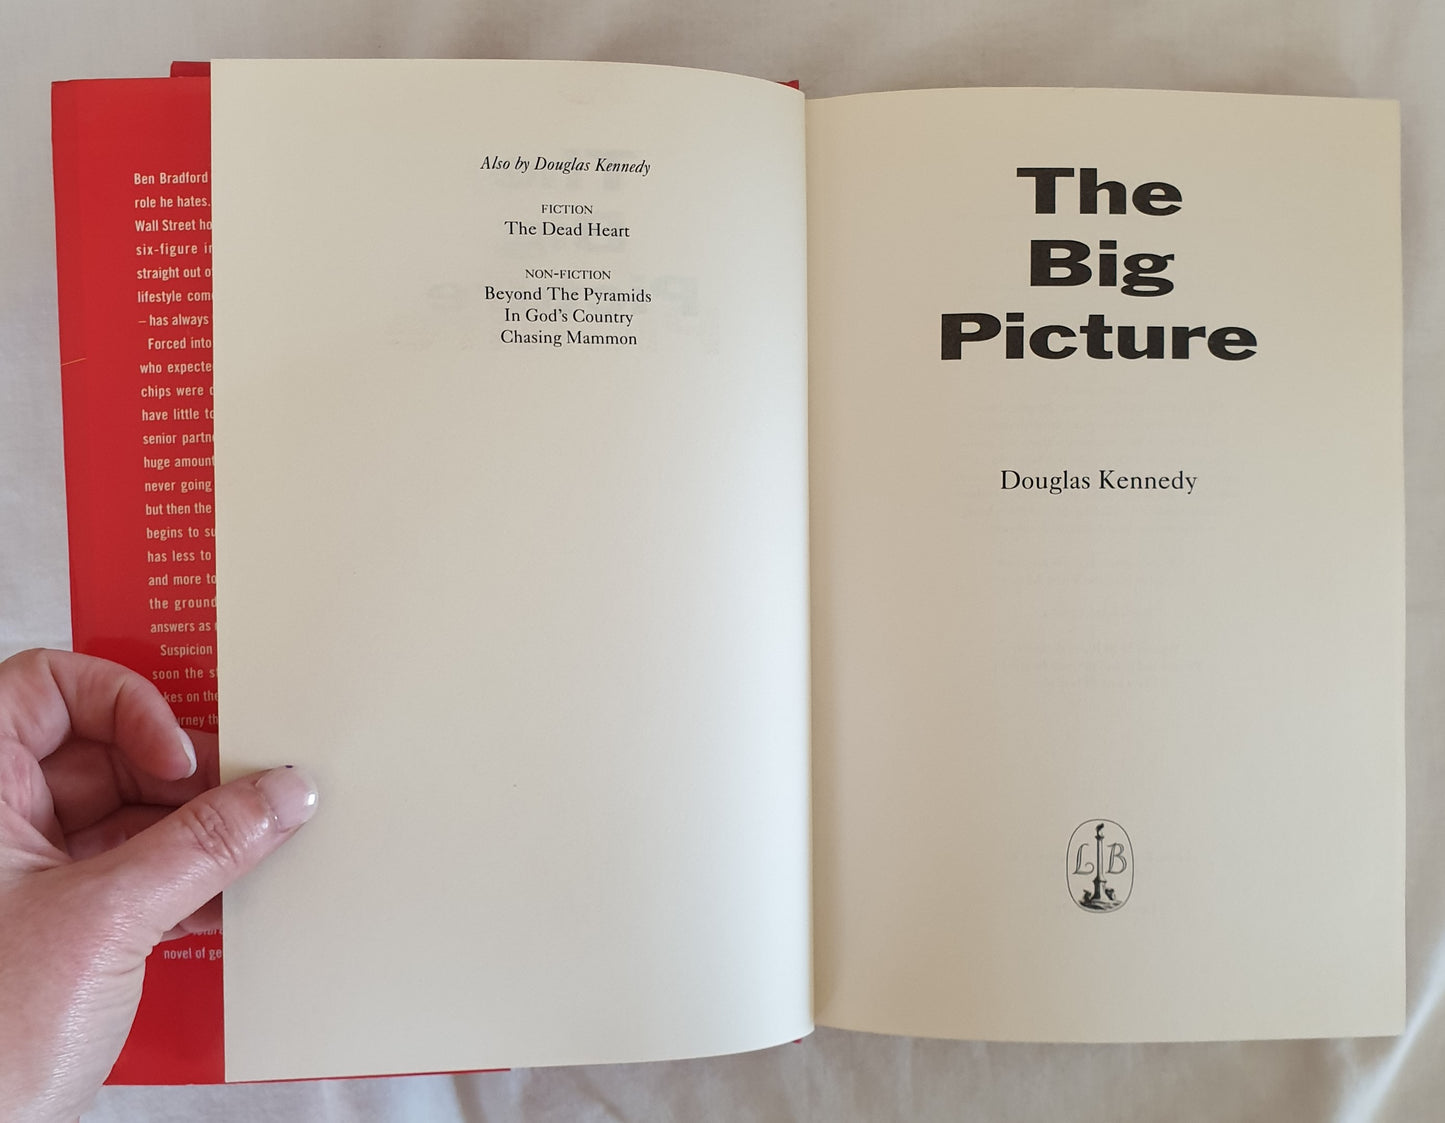 The Big Picture by Douglas Kennedy